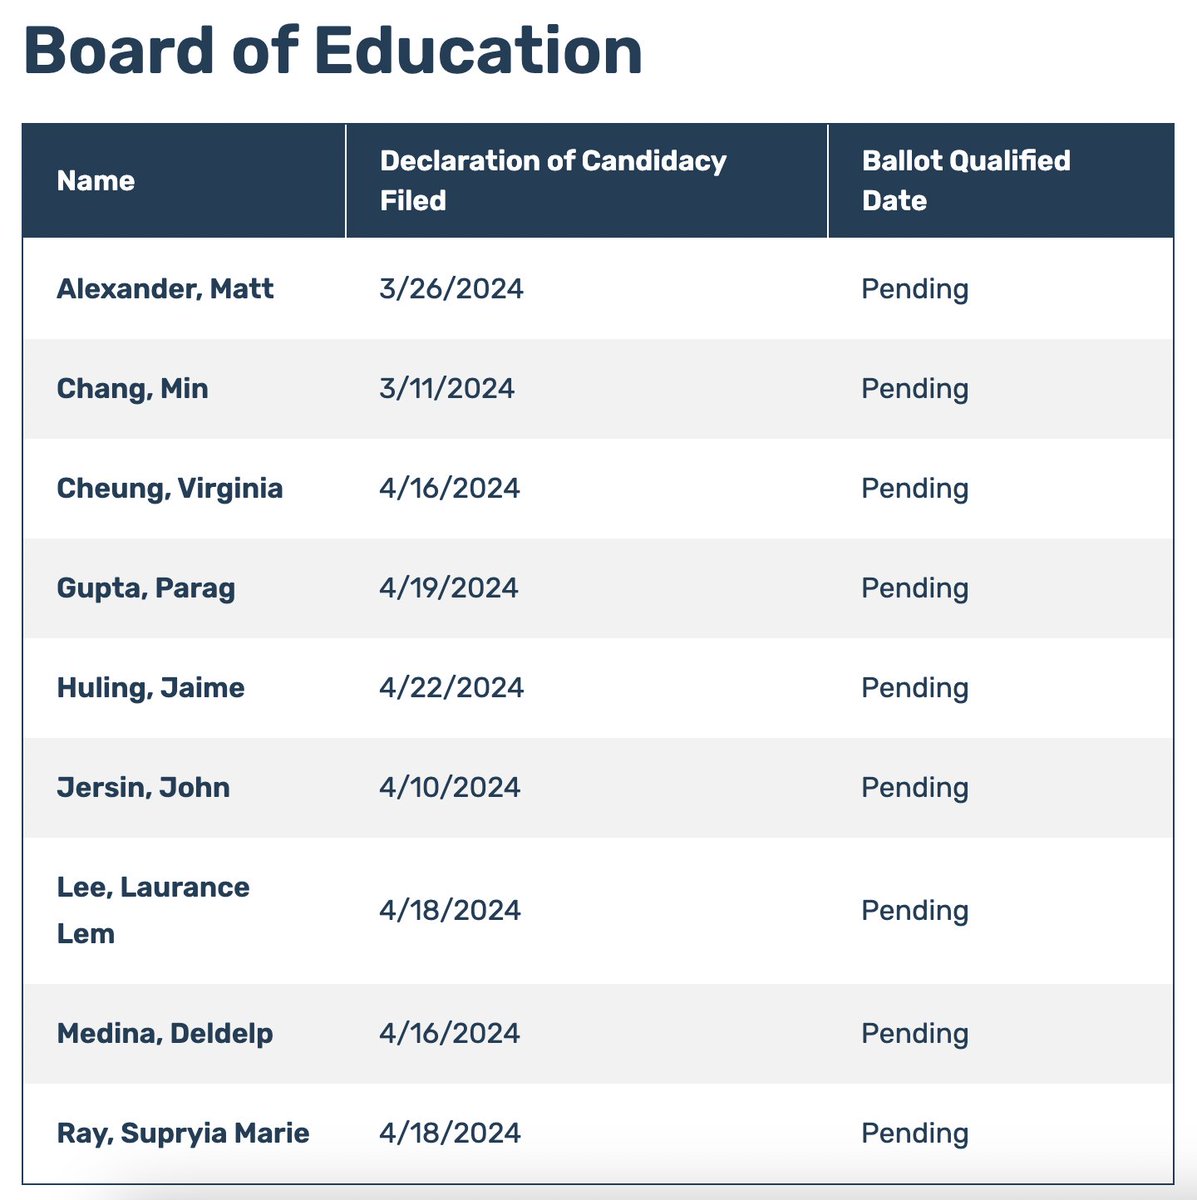 Winning the School Board this November! Four seats are coming up for election this November -- a number of candidates have filed to run. We're kicking off our endorsement process soon ... what questions would you like us to ask the candidates?